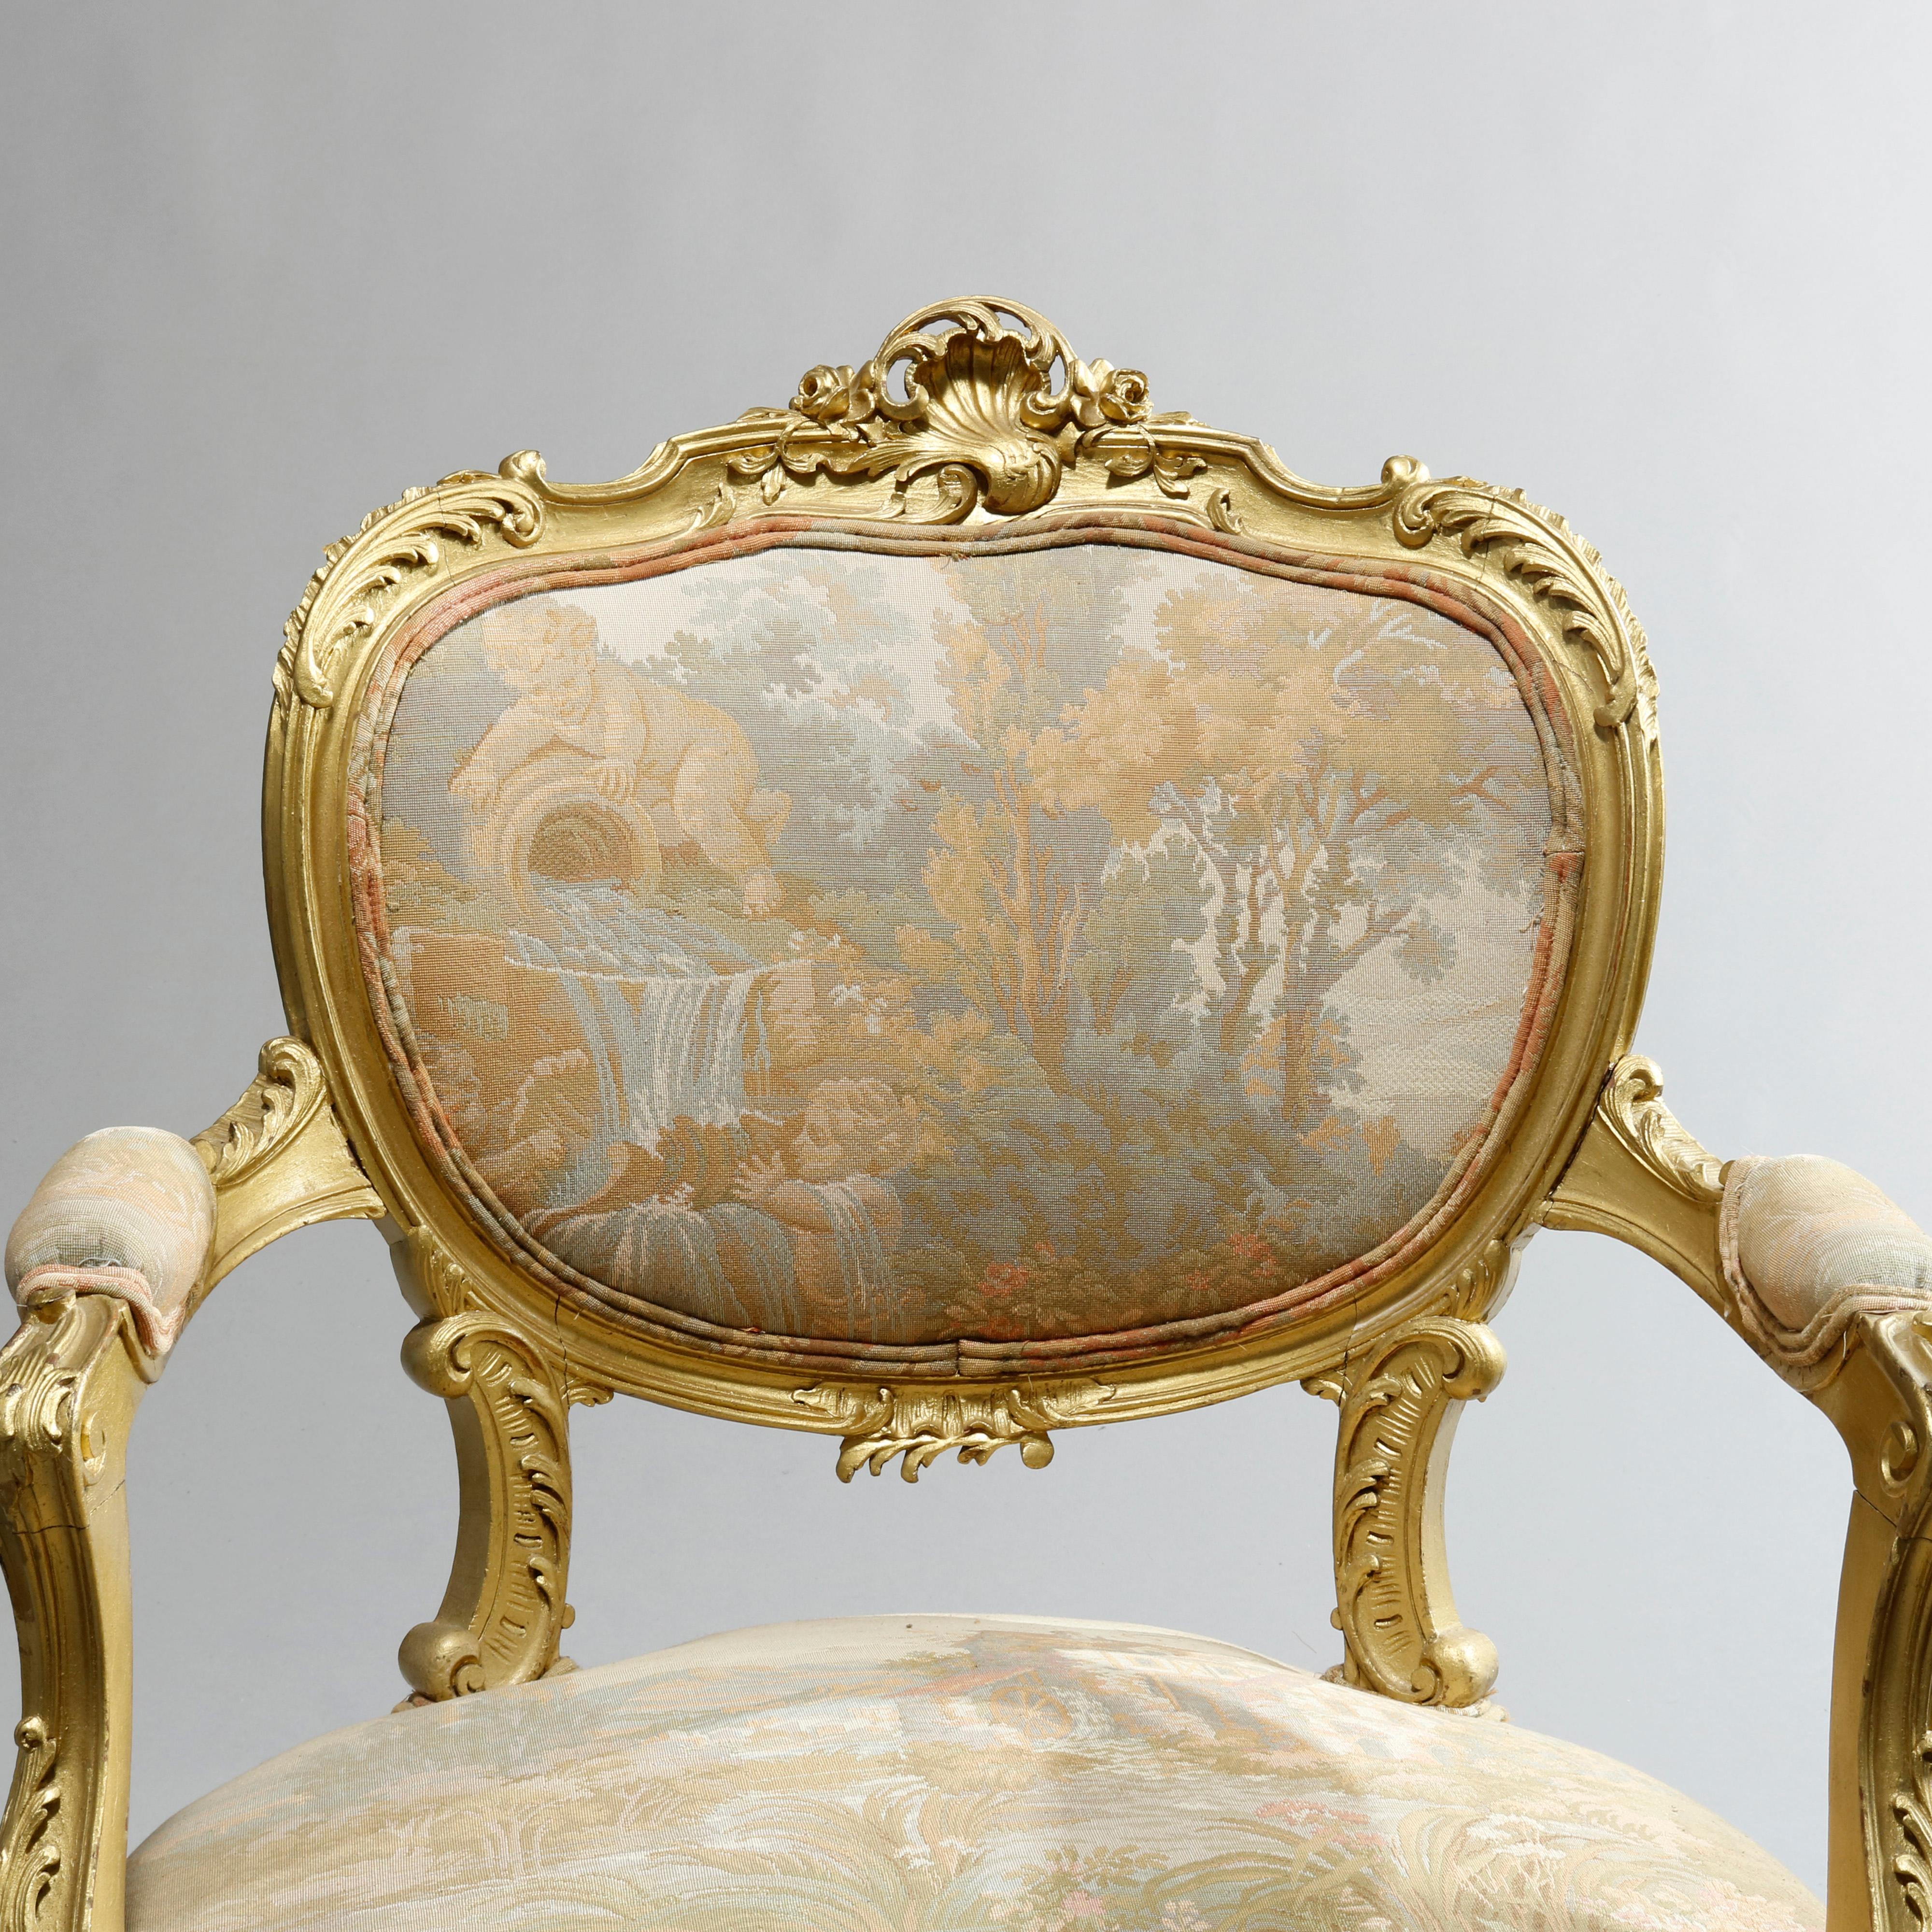 An antique French Rococo three-piece parlor set offer giltwood frames with pierced stylized shell crests over acanthus, foliate and scroll frame with tapestry seats, arms and backs having Classical scenes with cherubs, landscape and structures,